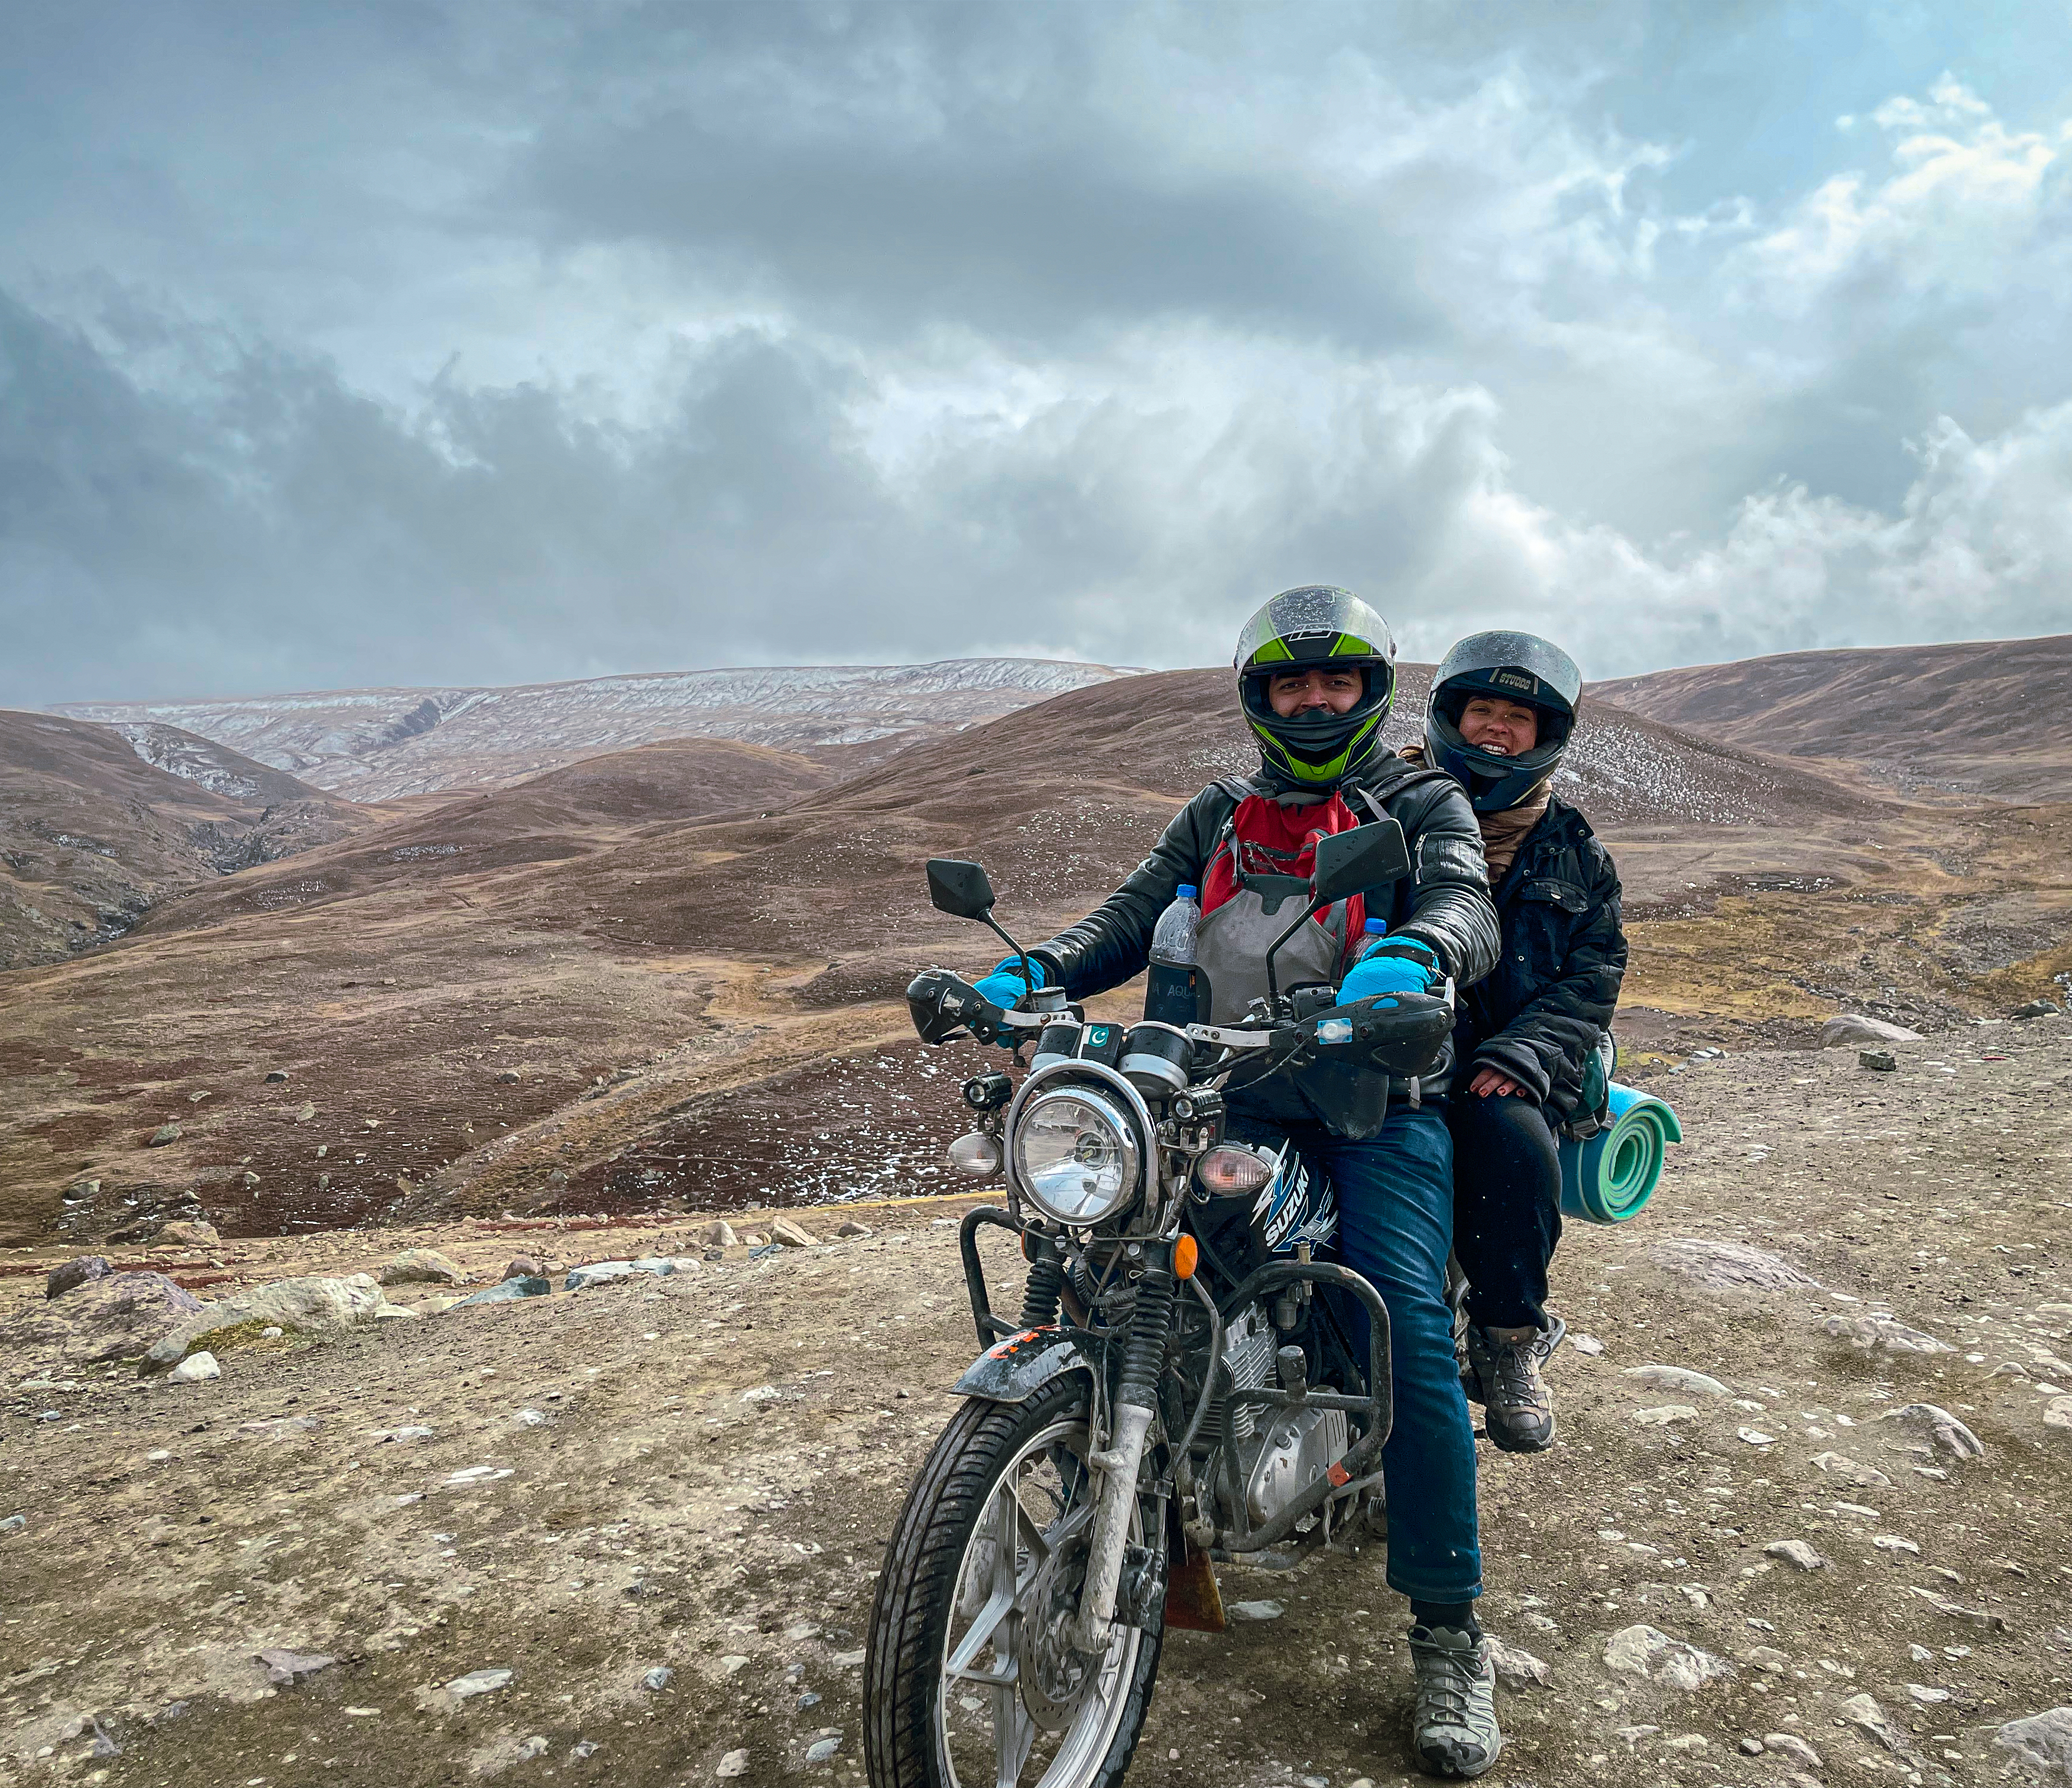 Two motorcycle riders smiling inside of Deosai National Park in Pakistan